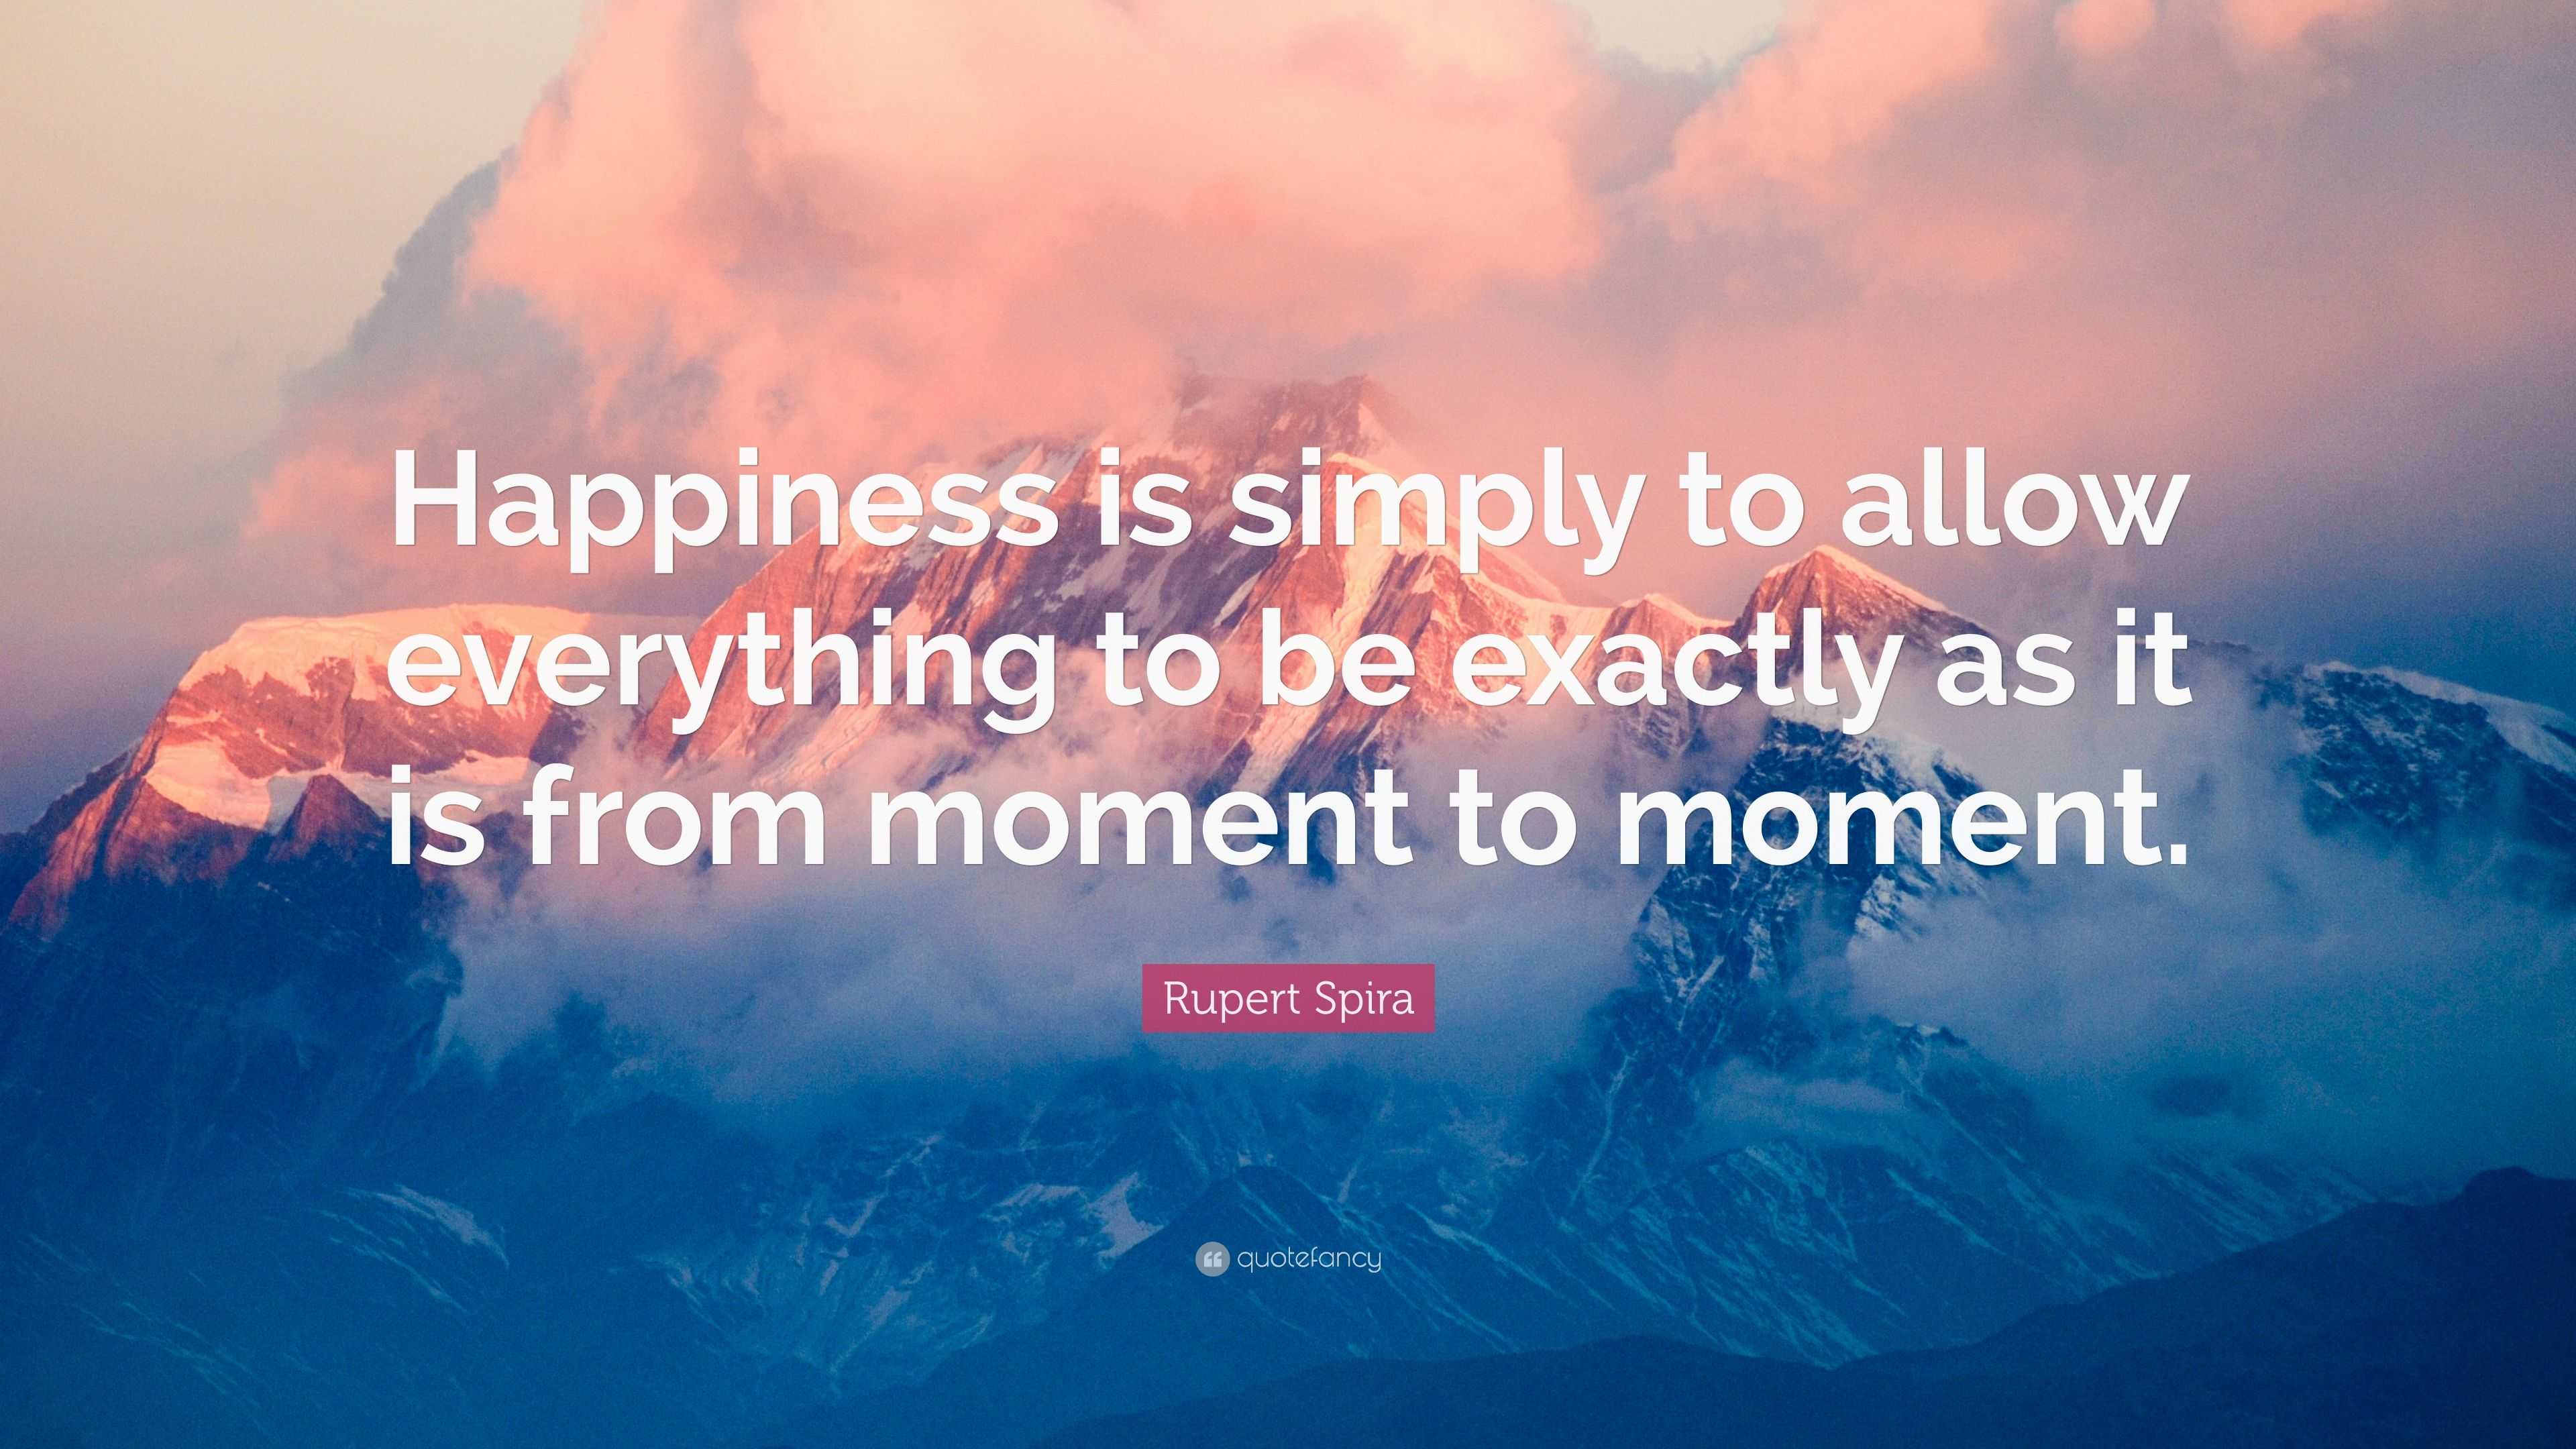 Rupert Spira Quote: “Happiness is simply to allow everything to be ...